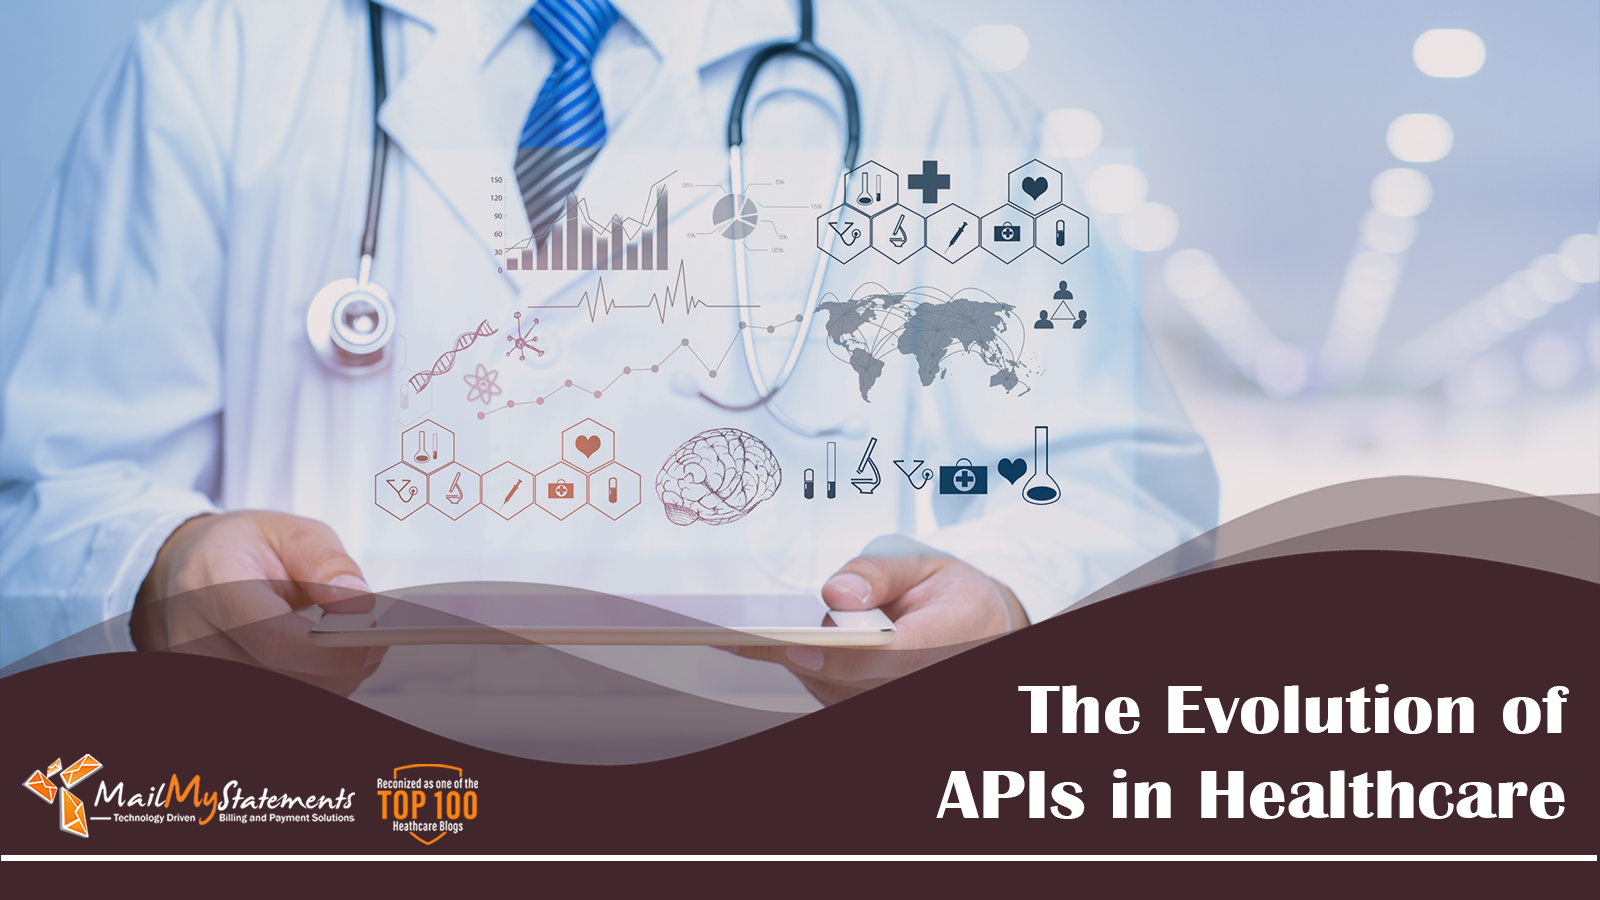 The Evolution of APIs in Healthcare